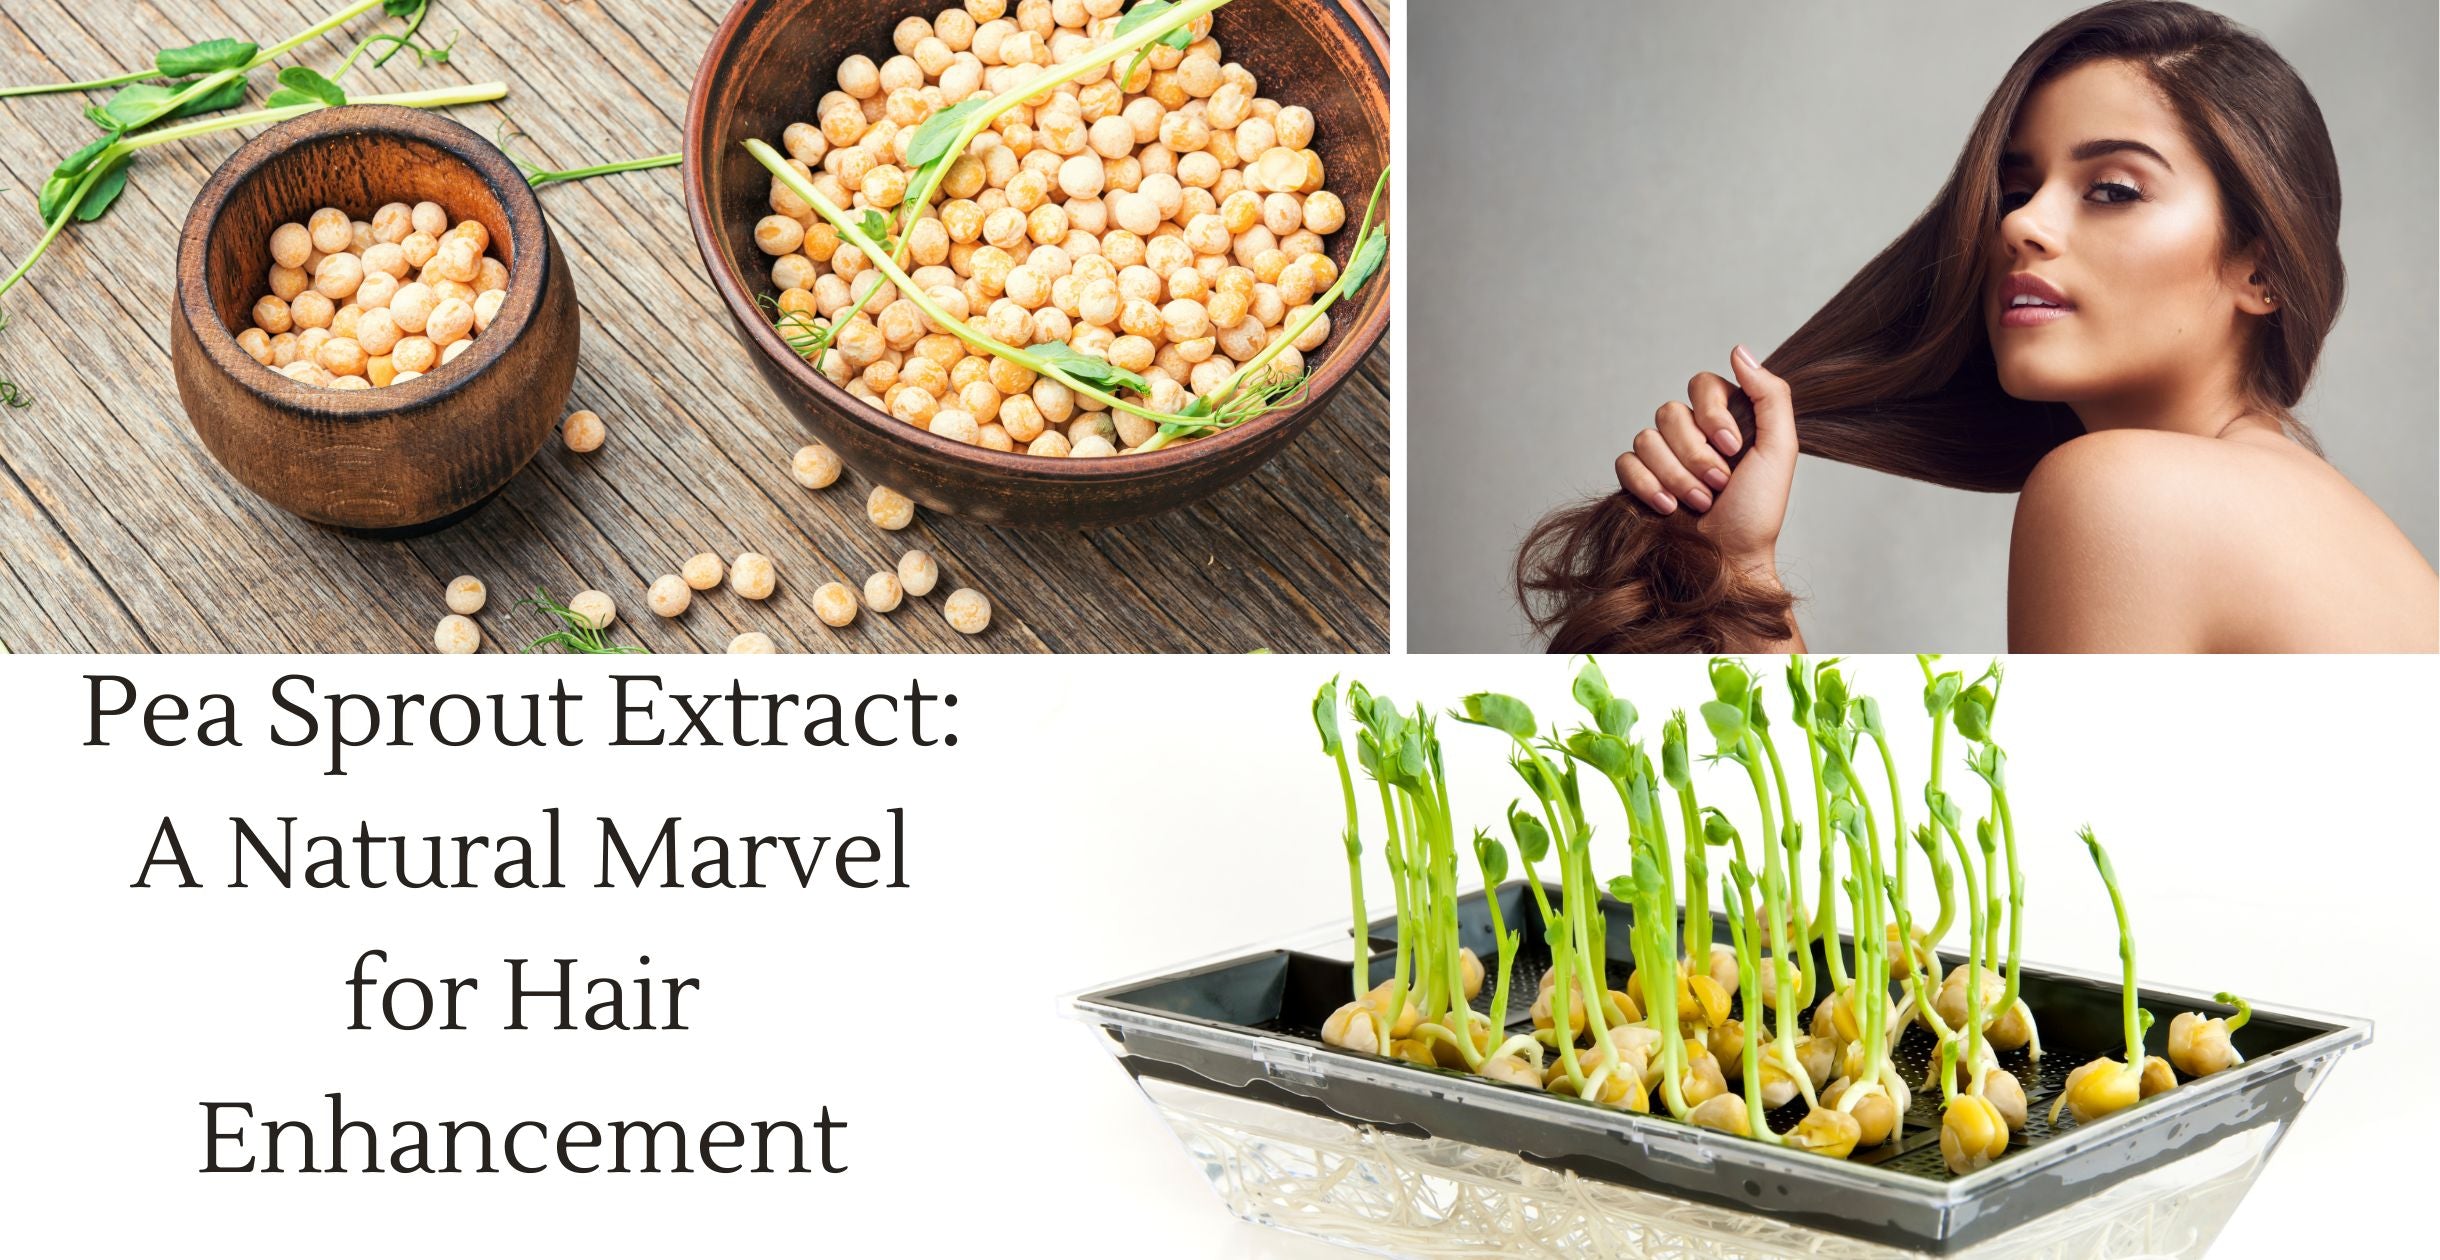 Pea Sprout Extract: A Natural Marvel for Hair Enhancement